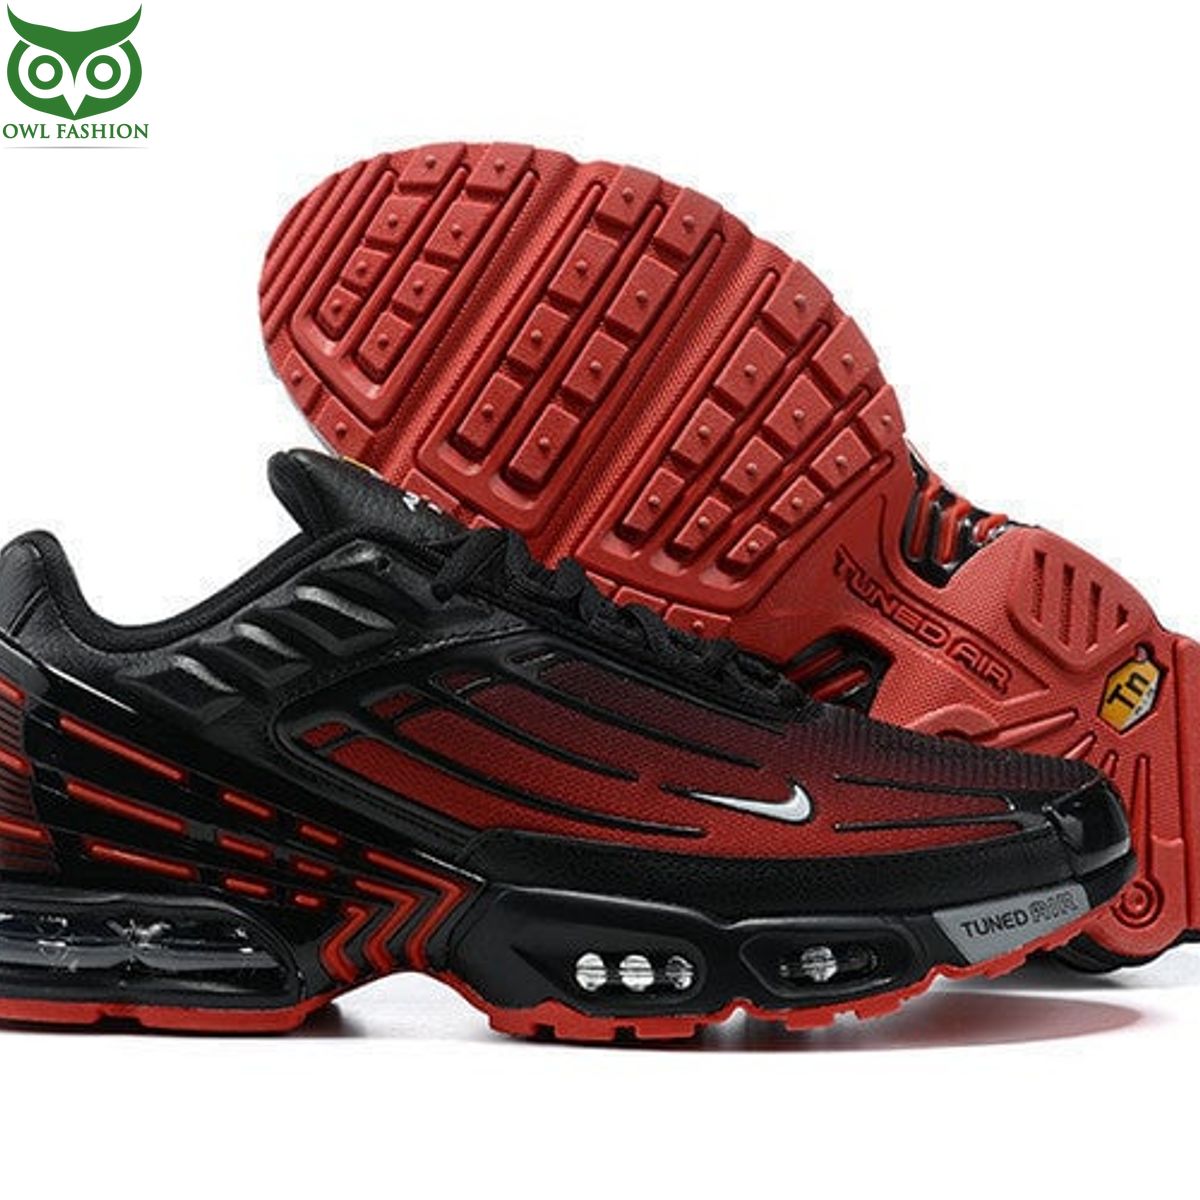 Nike Air Max Plus 3 GS Red Black Shoes Sneakers My friend and partner